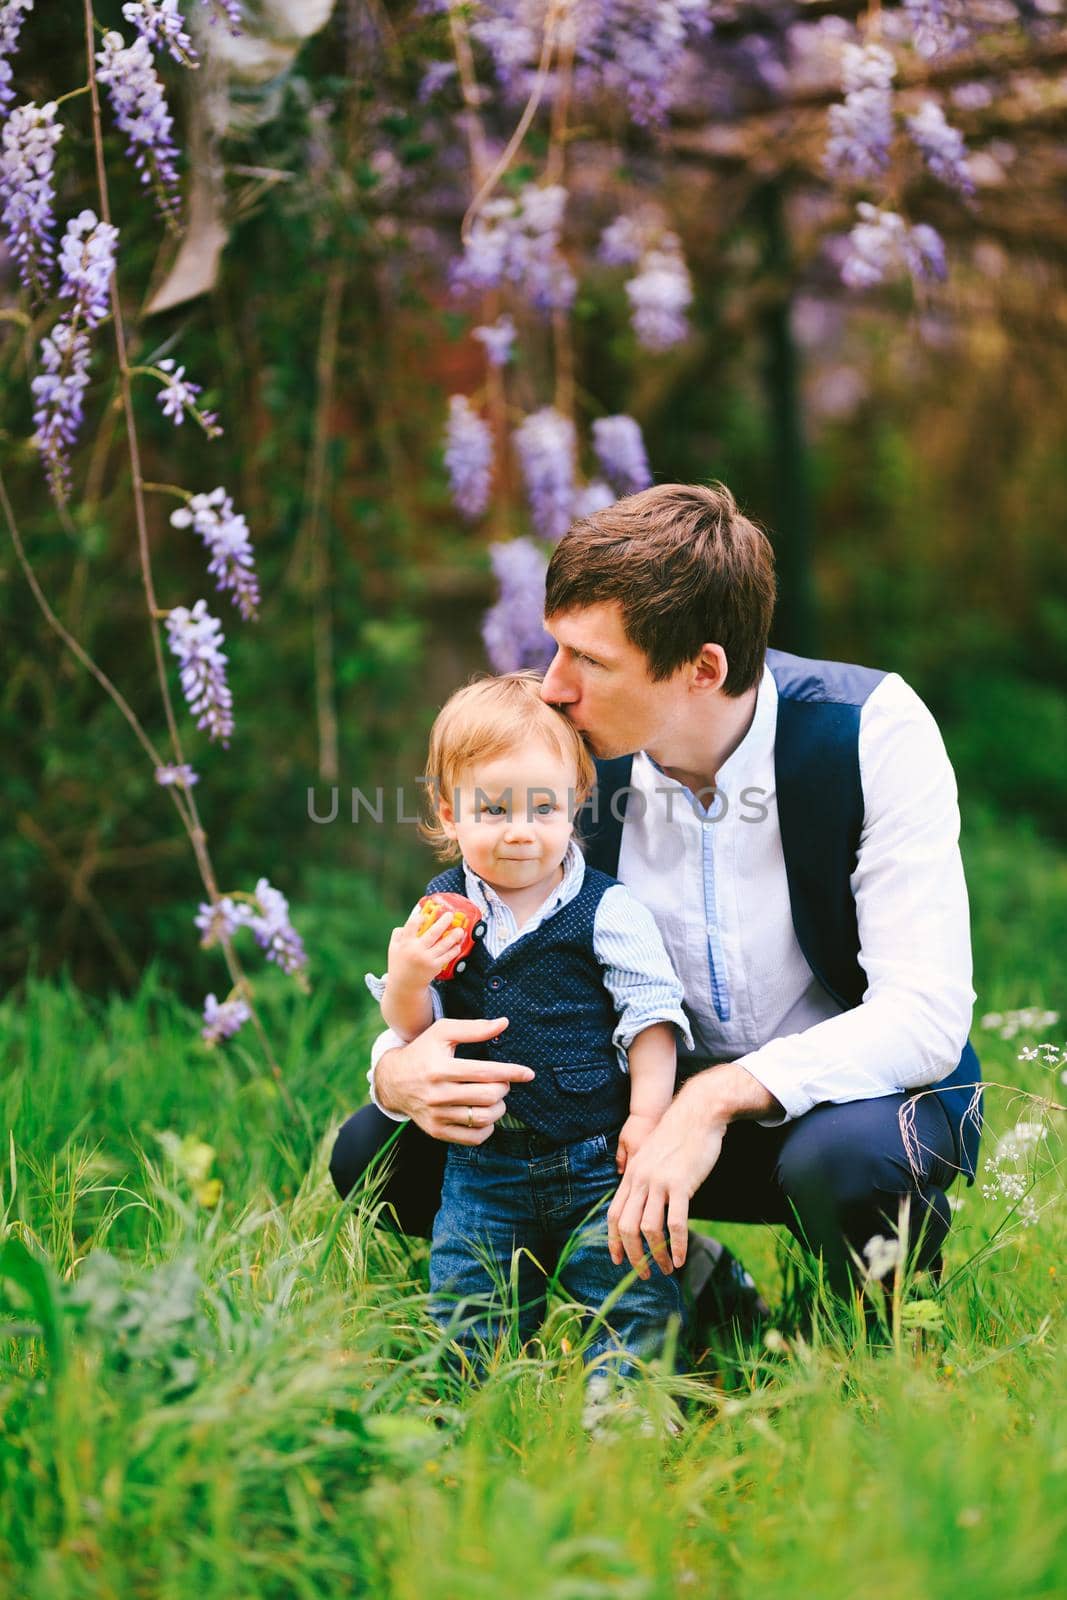 Father is kissing his baby boy on top of the head with a wysteria blooming in the background by Nadtochiy